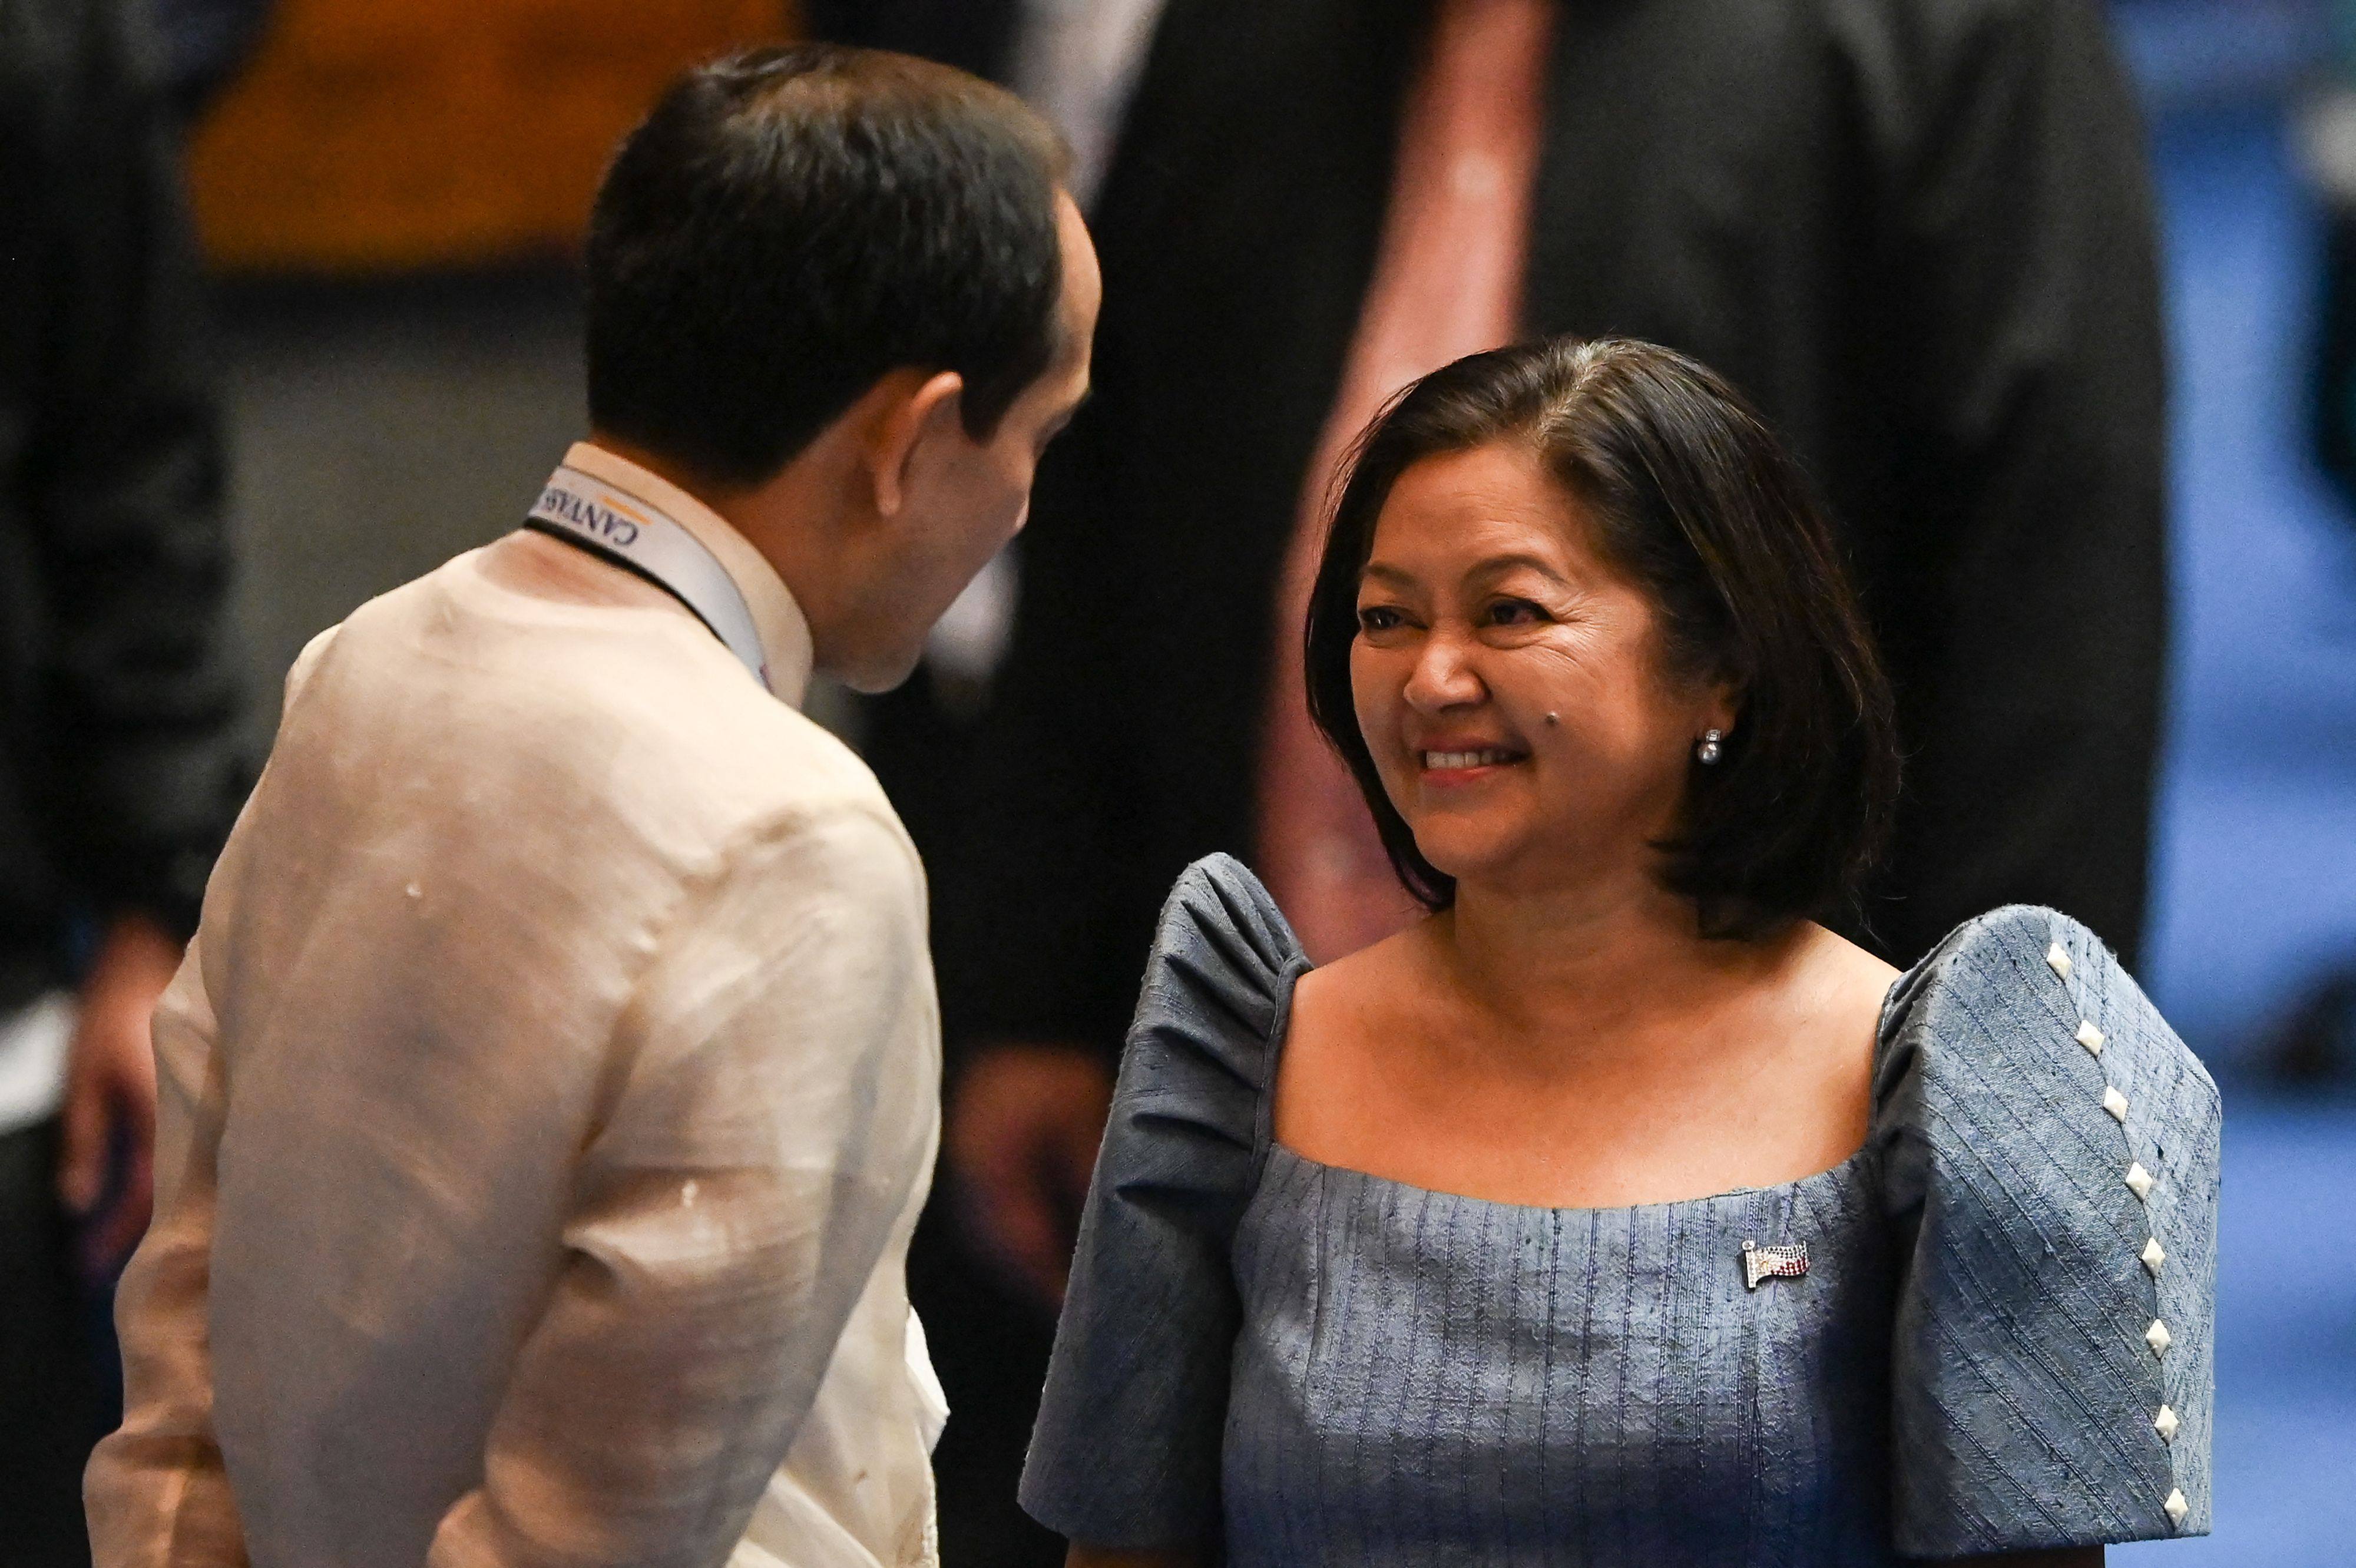 First lady Louise Araneta-Marcos chats during the presidential proclamation at the House of Representatives. In an interview, the first lady says she was “always kind to [the vice-president]” but the vice-president was “now a bad shot with me”. Photo: AFP